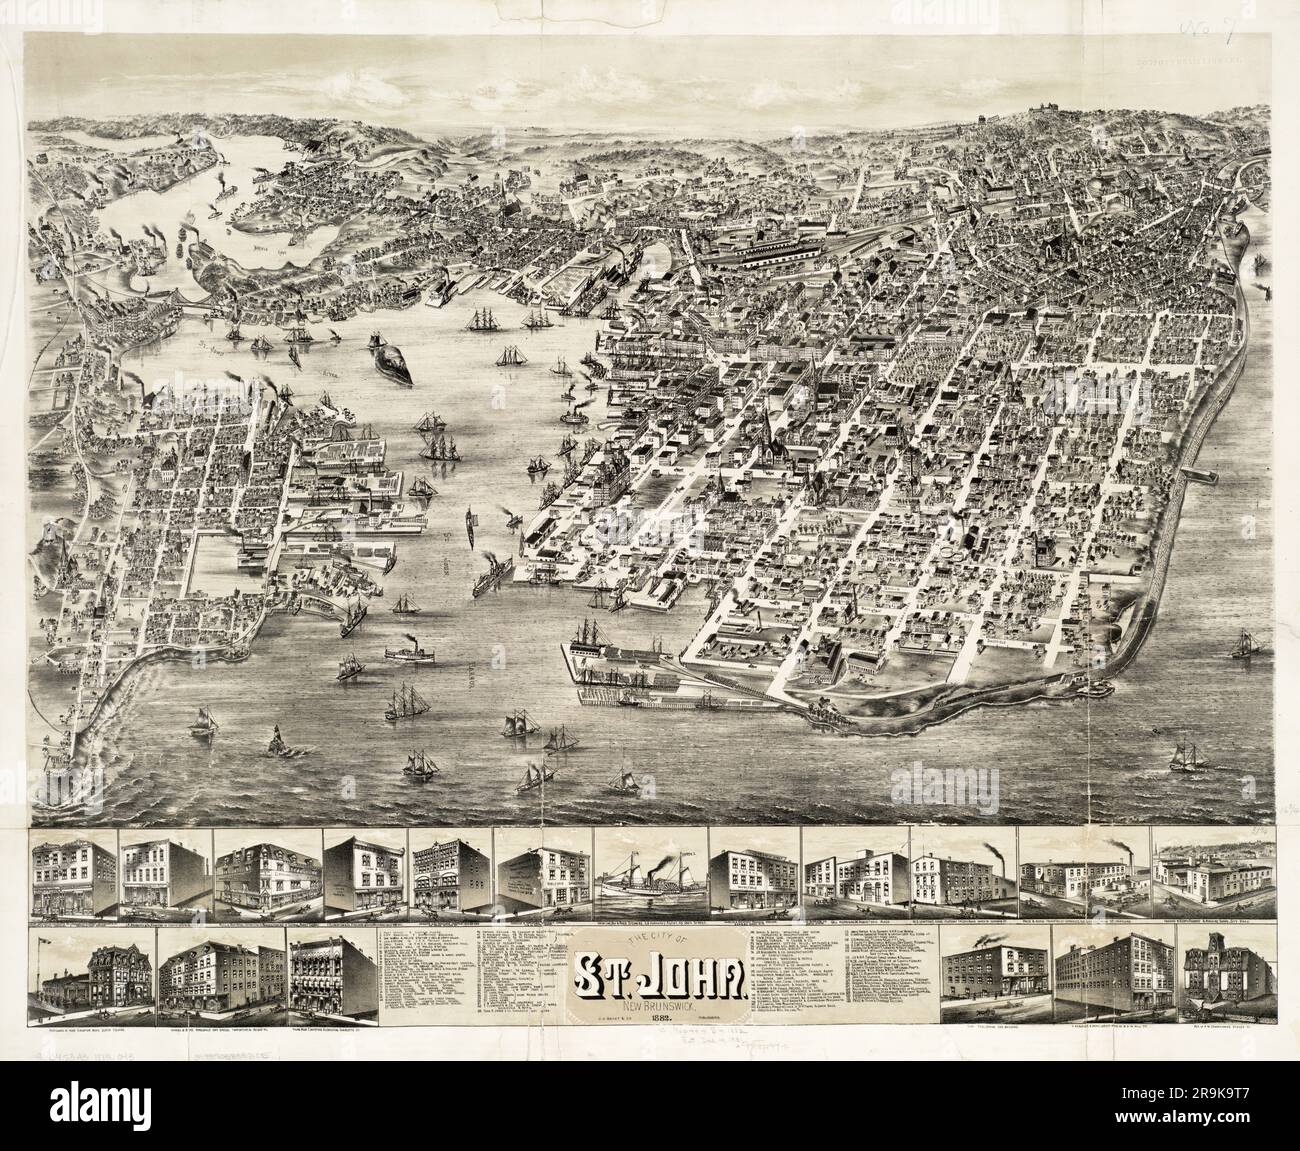 Bird's-eye view panoramic map of the city of Saint John, New Brunswick, Canada ca. 1882. Insets show buildings and sites of interest. Stock Photo